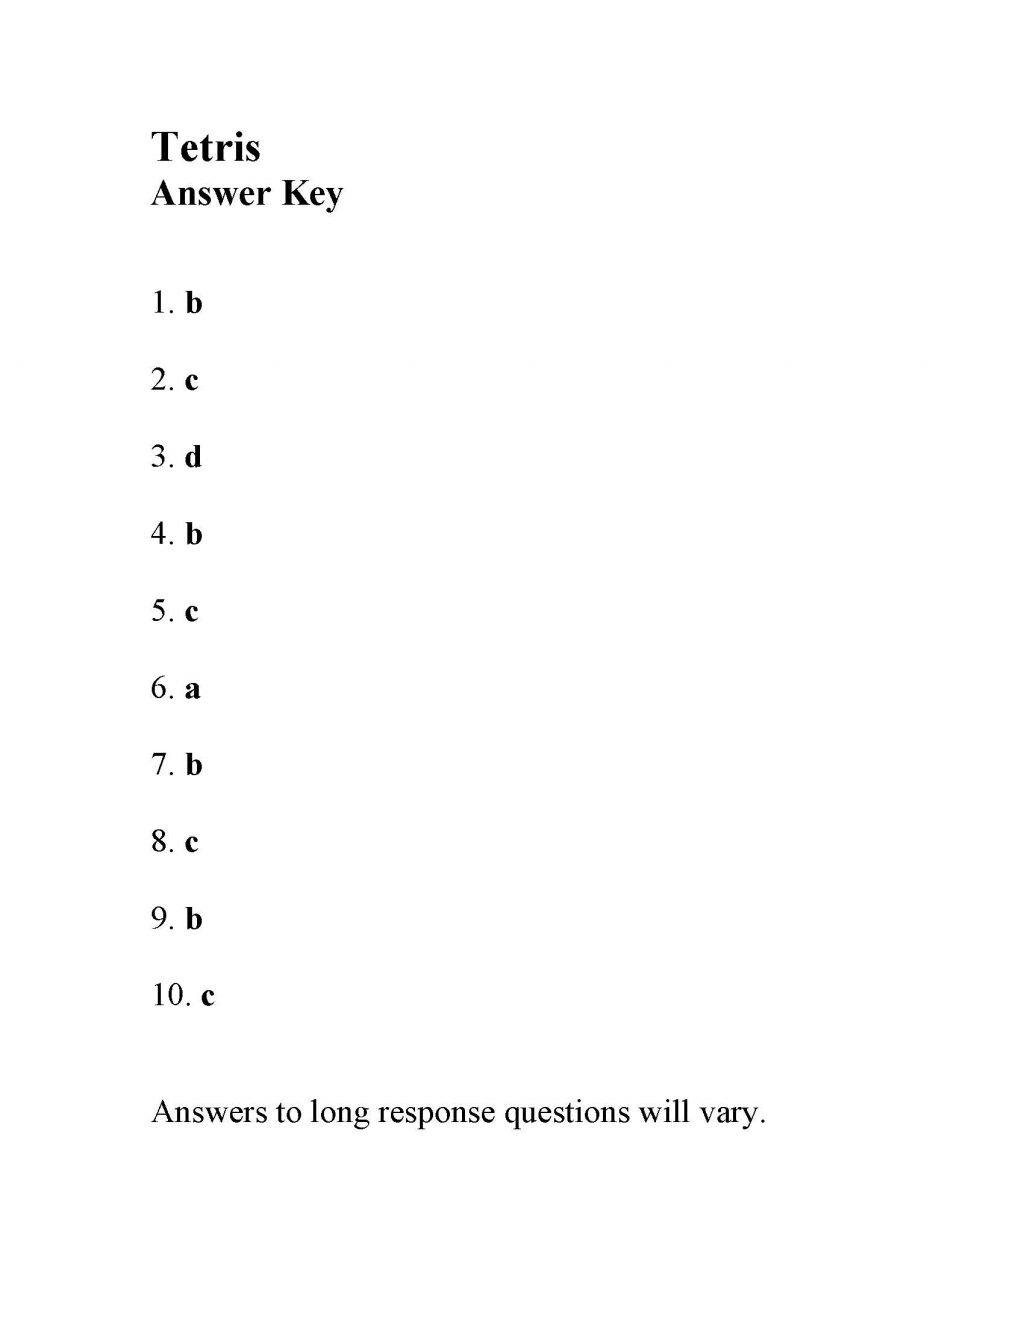 Worksheet Ideas ~ Tetris Answers Reading Comprehension for Multiplication Worksheets Multiple Choice